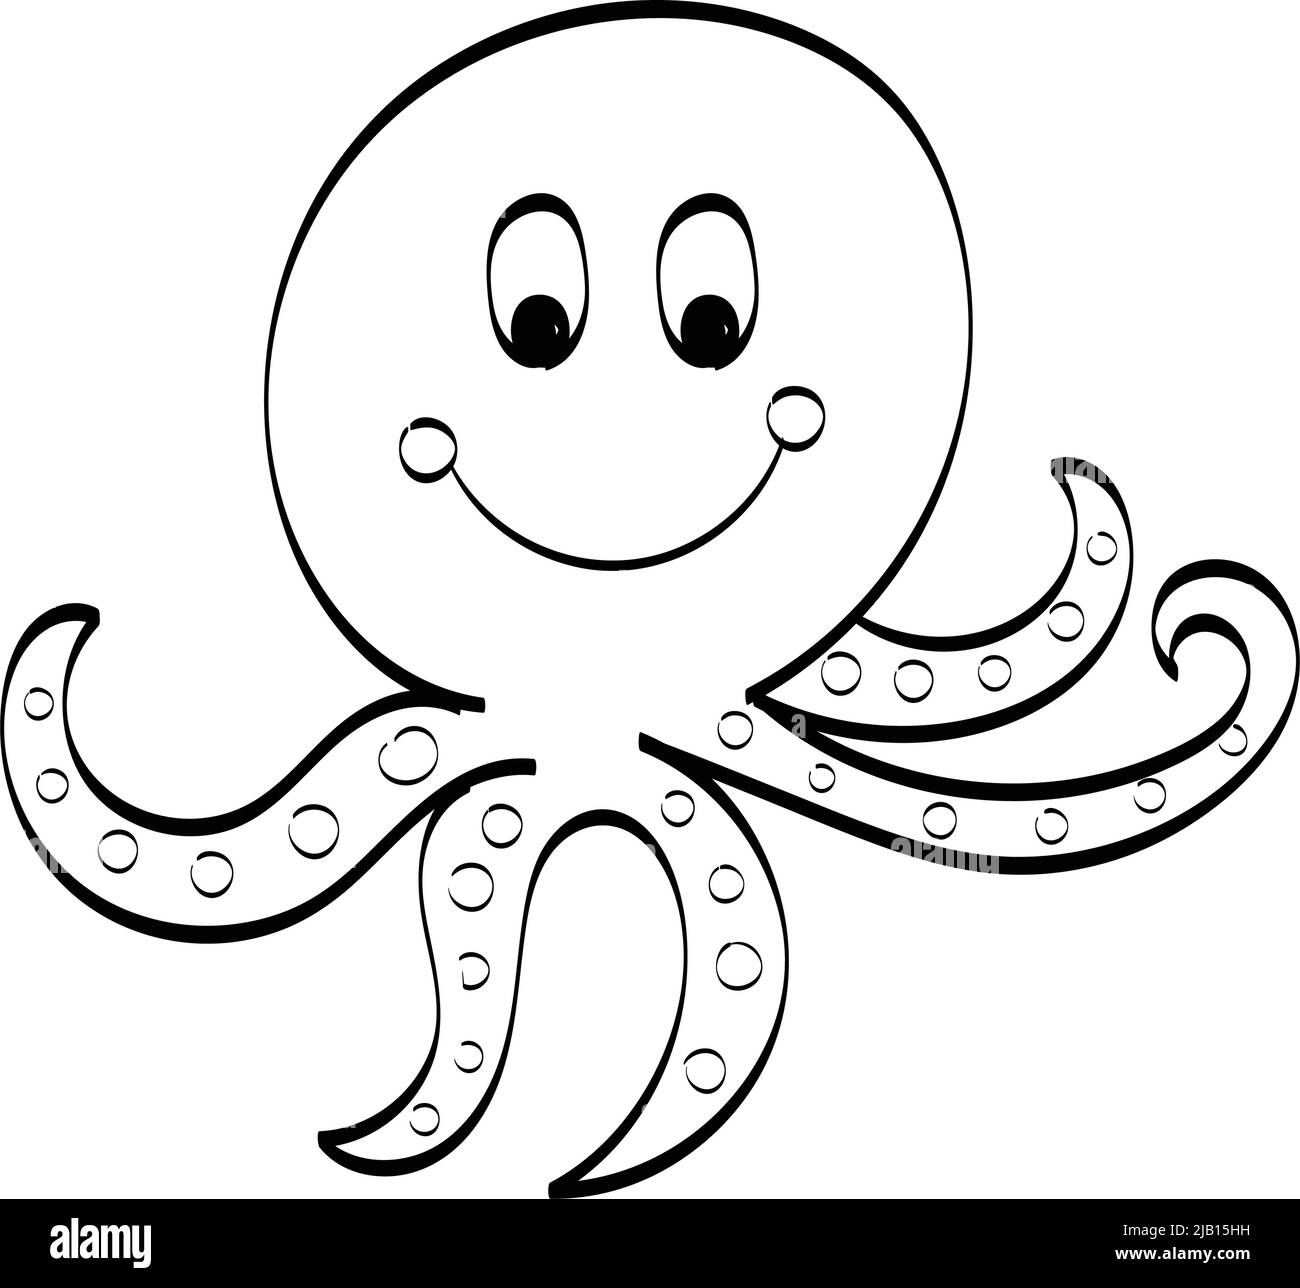 Octopus Coloring Printable Page. Line Art Drawing for print or use as ...